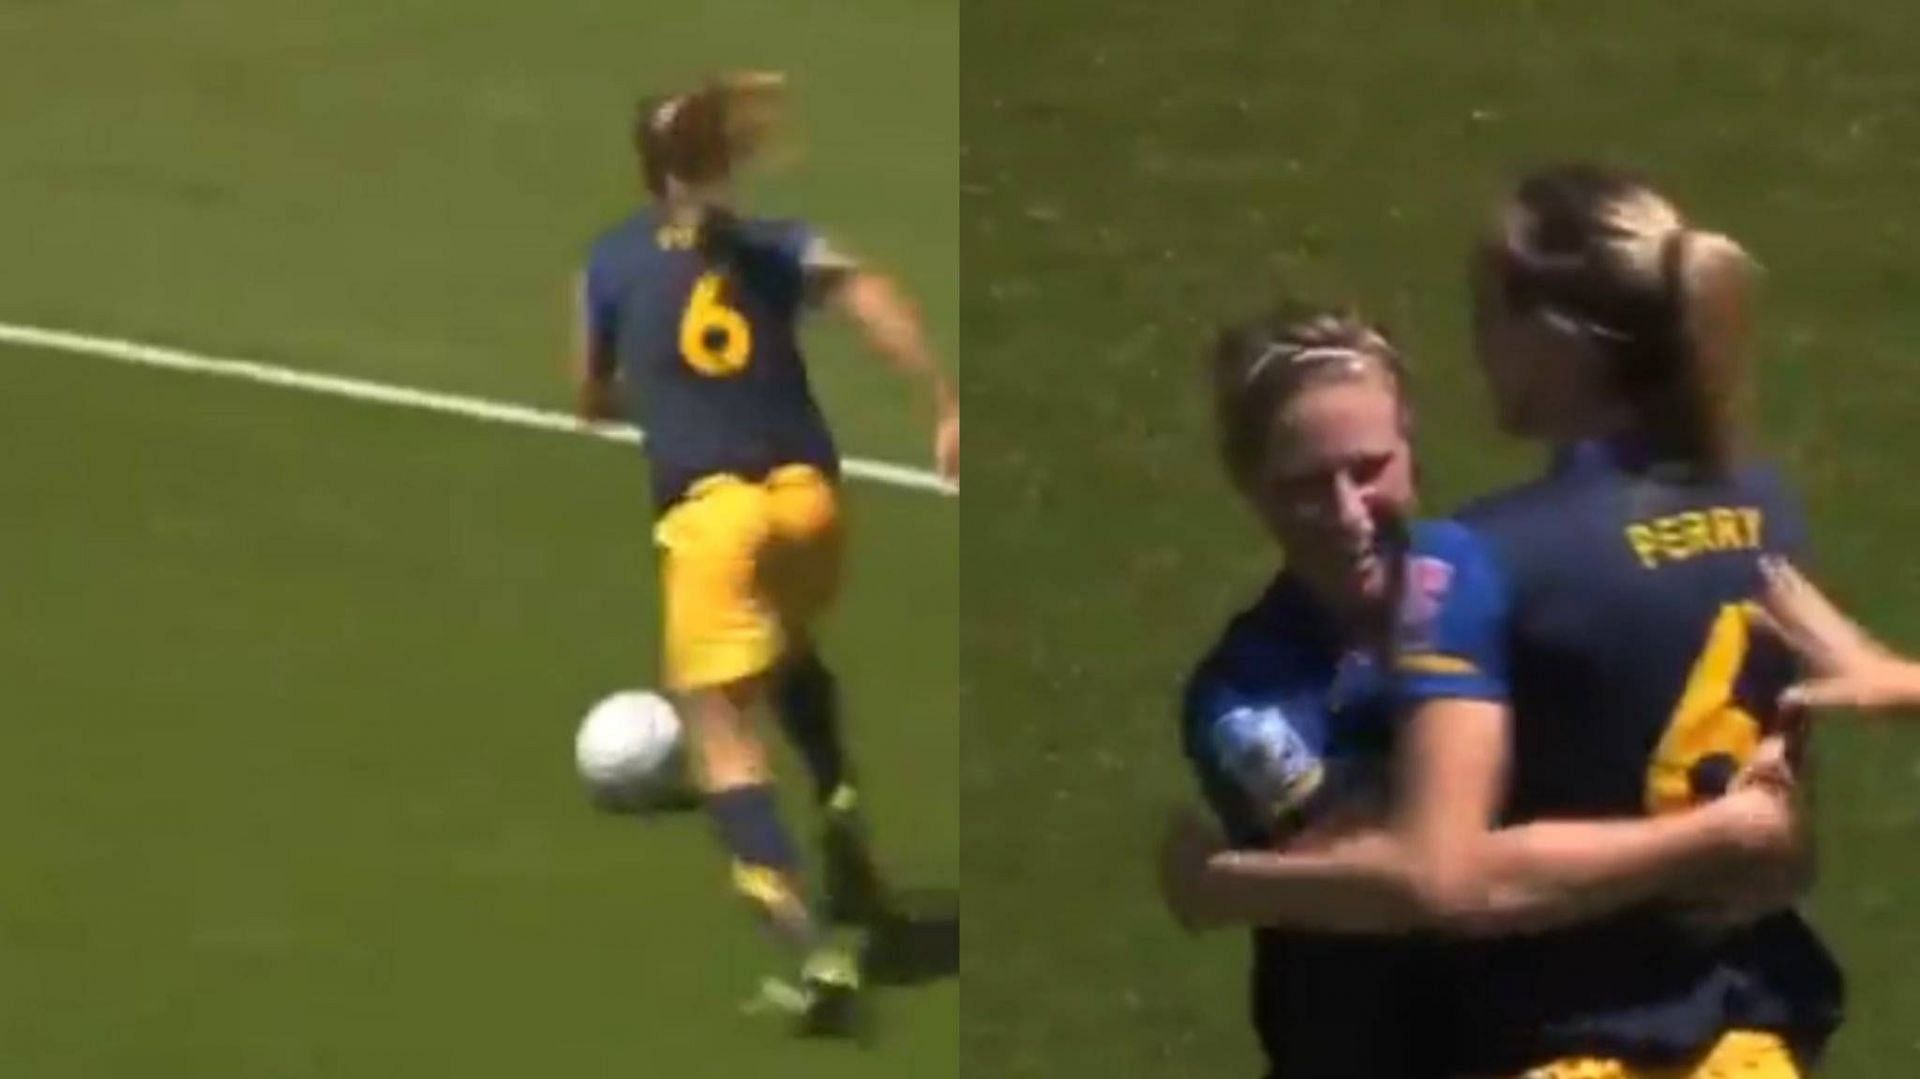 Ellyse Perry hit a goal for Australia at the mega event in 2011 (Image: FIFA TV/Twitter)